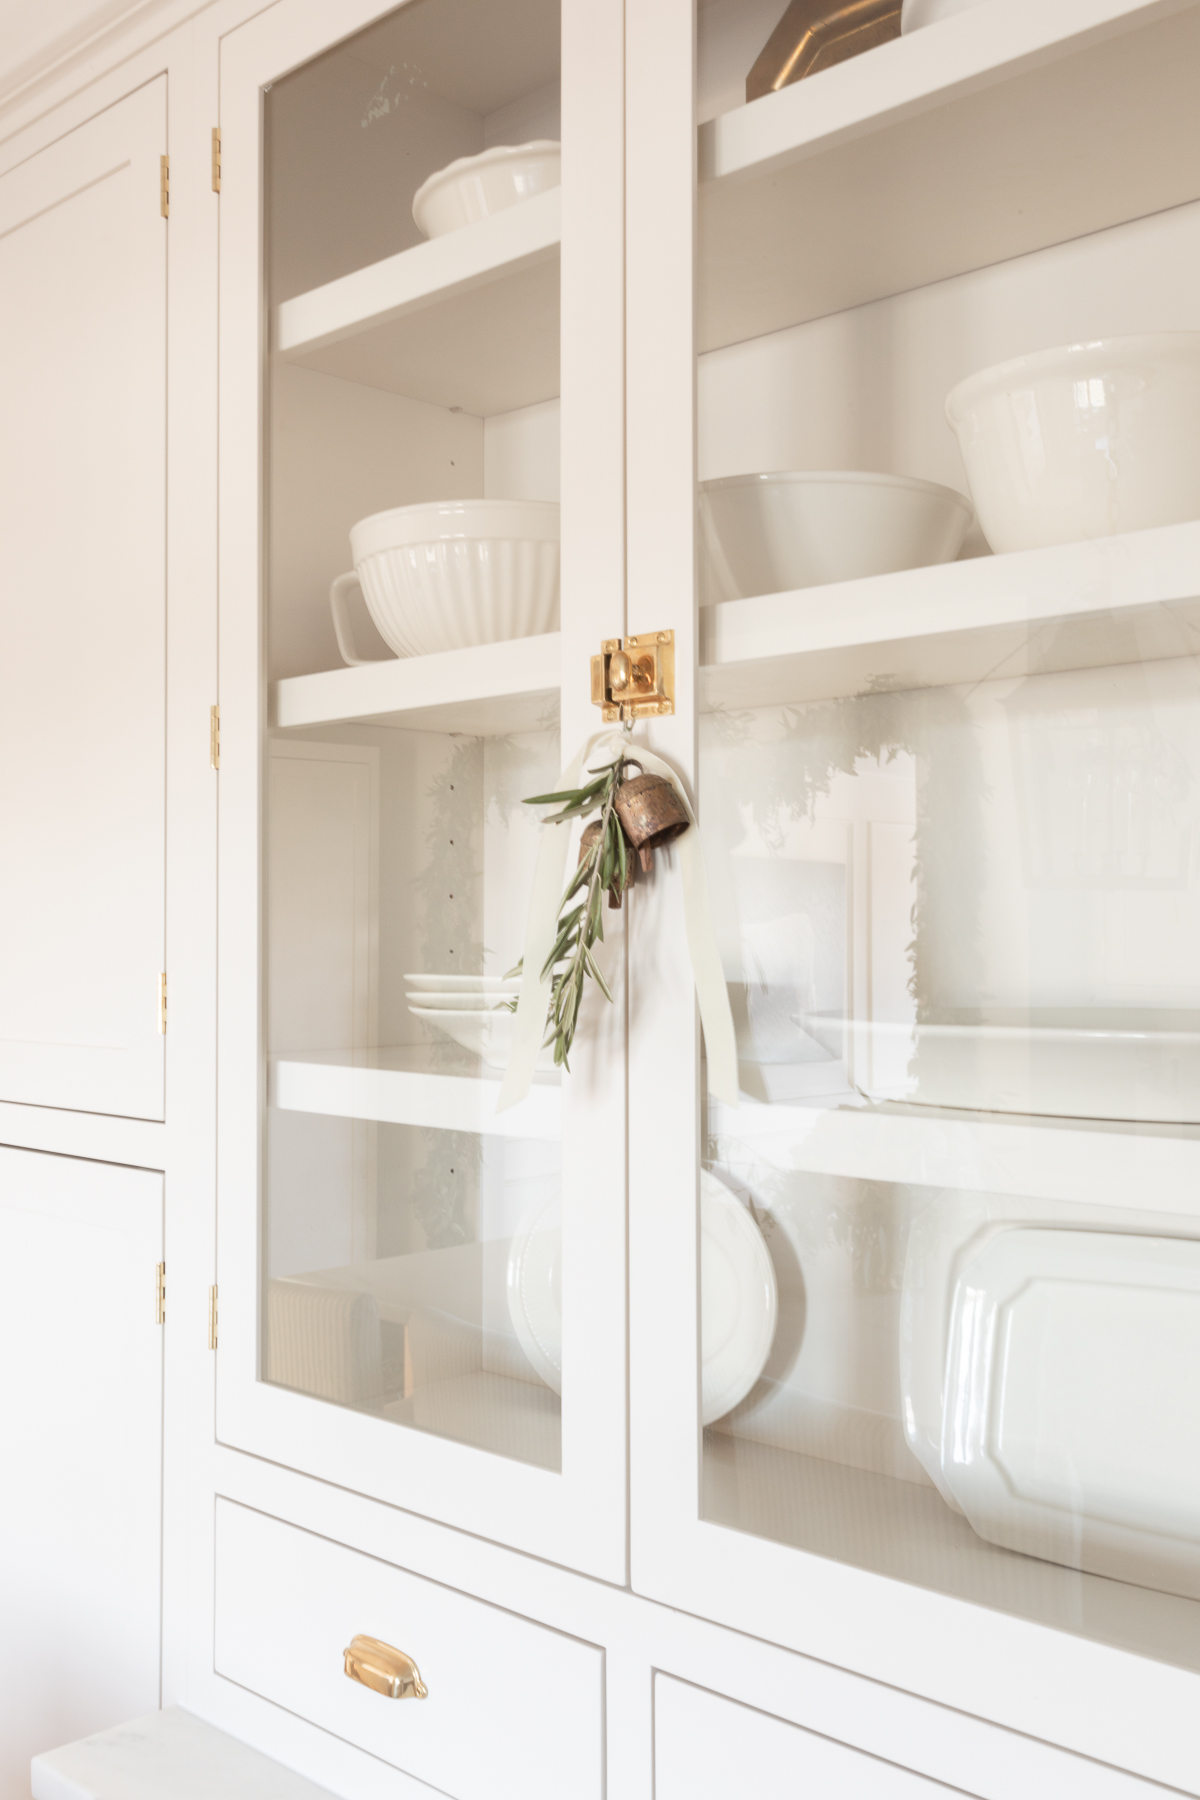 Glass shaker cabinets in a cream colored kitchen, brass hardware on the doors